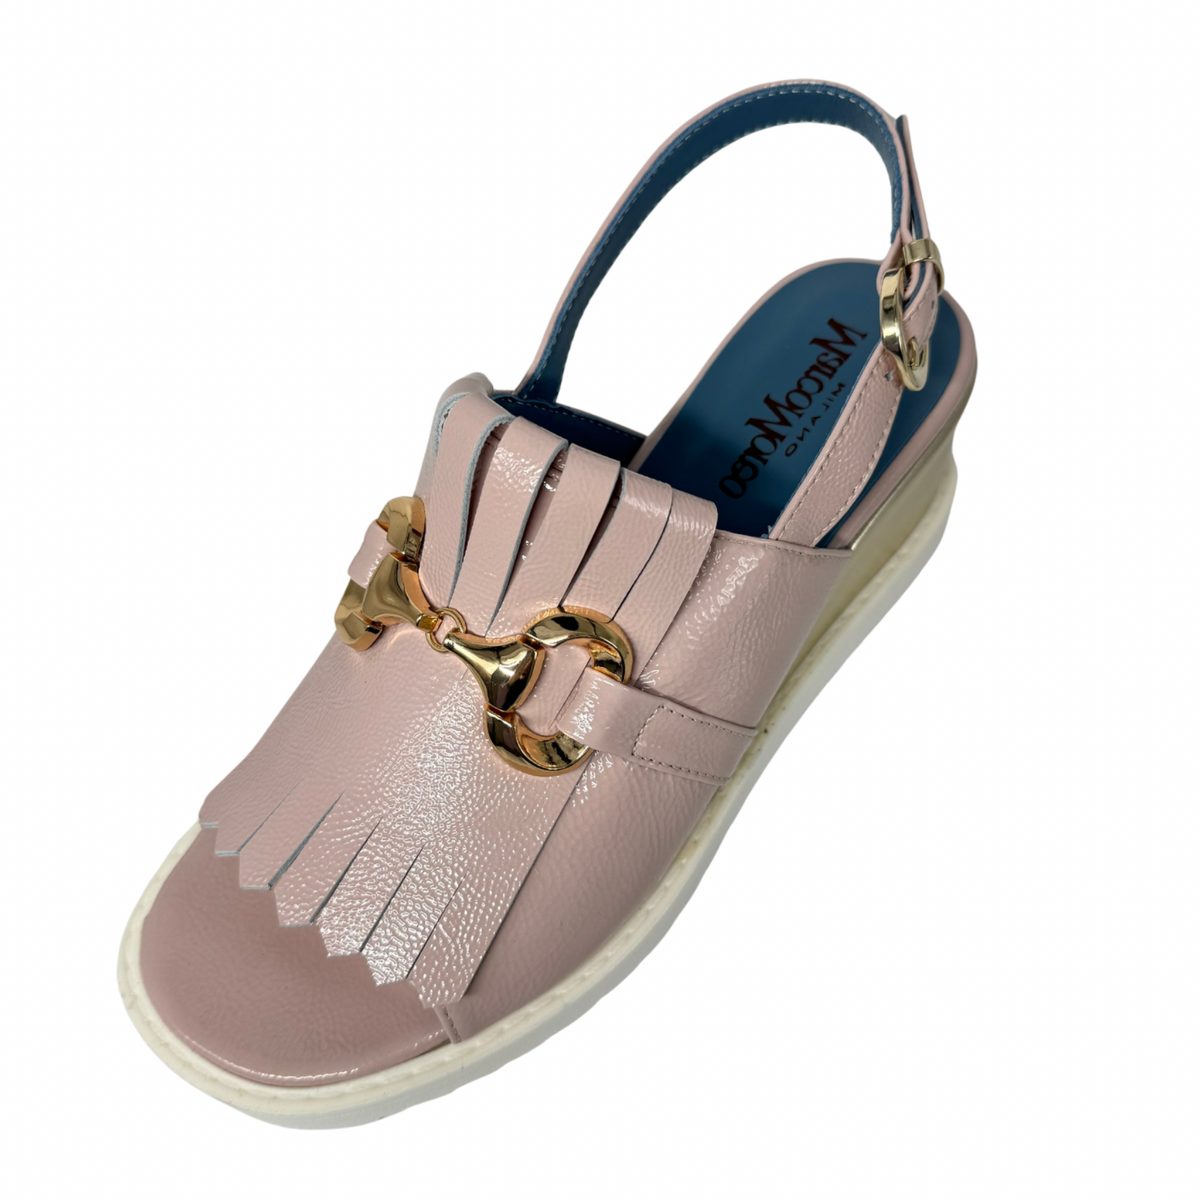 Marco Moreo Pale Pink Leather Slingback Wedge